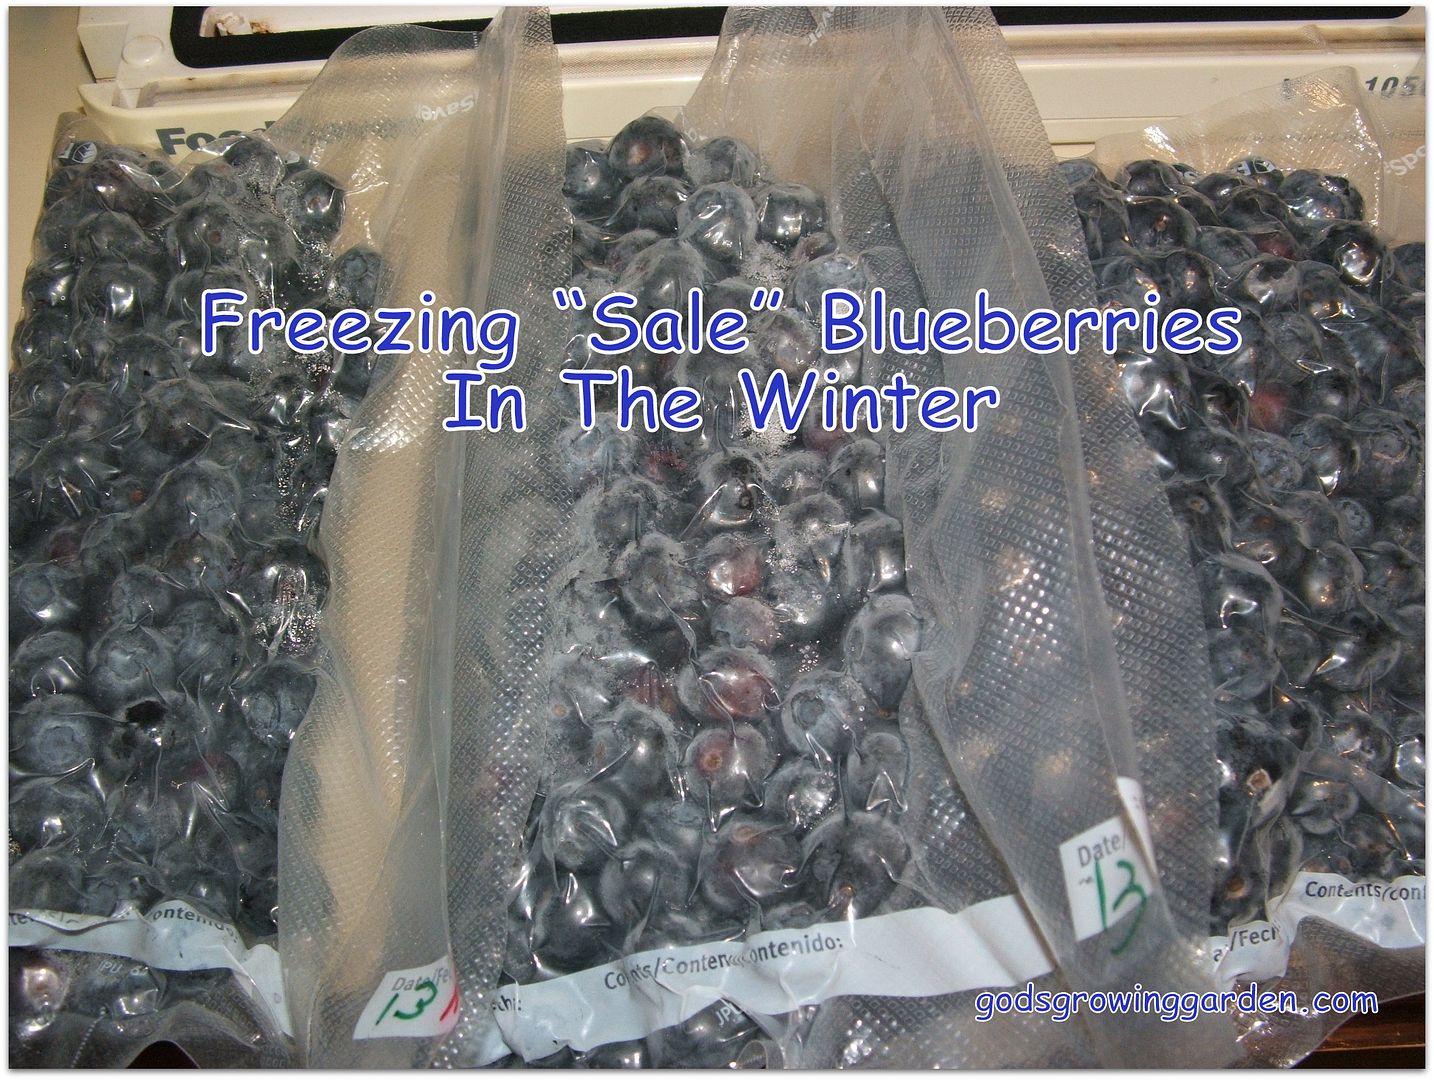 Freezing Blueberries, by Angie Ouellette-Tower for godsgrowinggarden.com